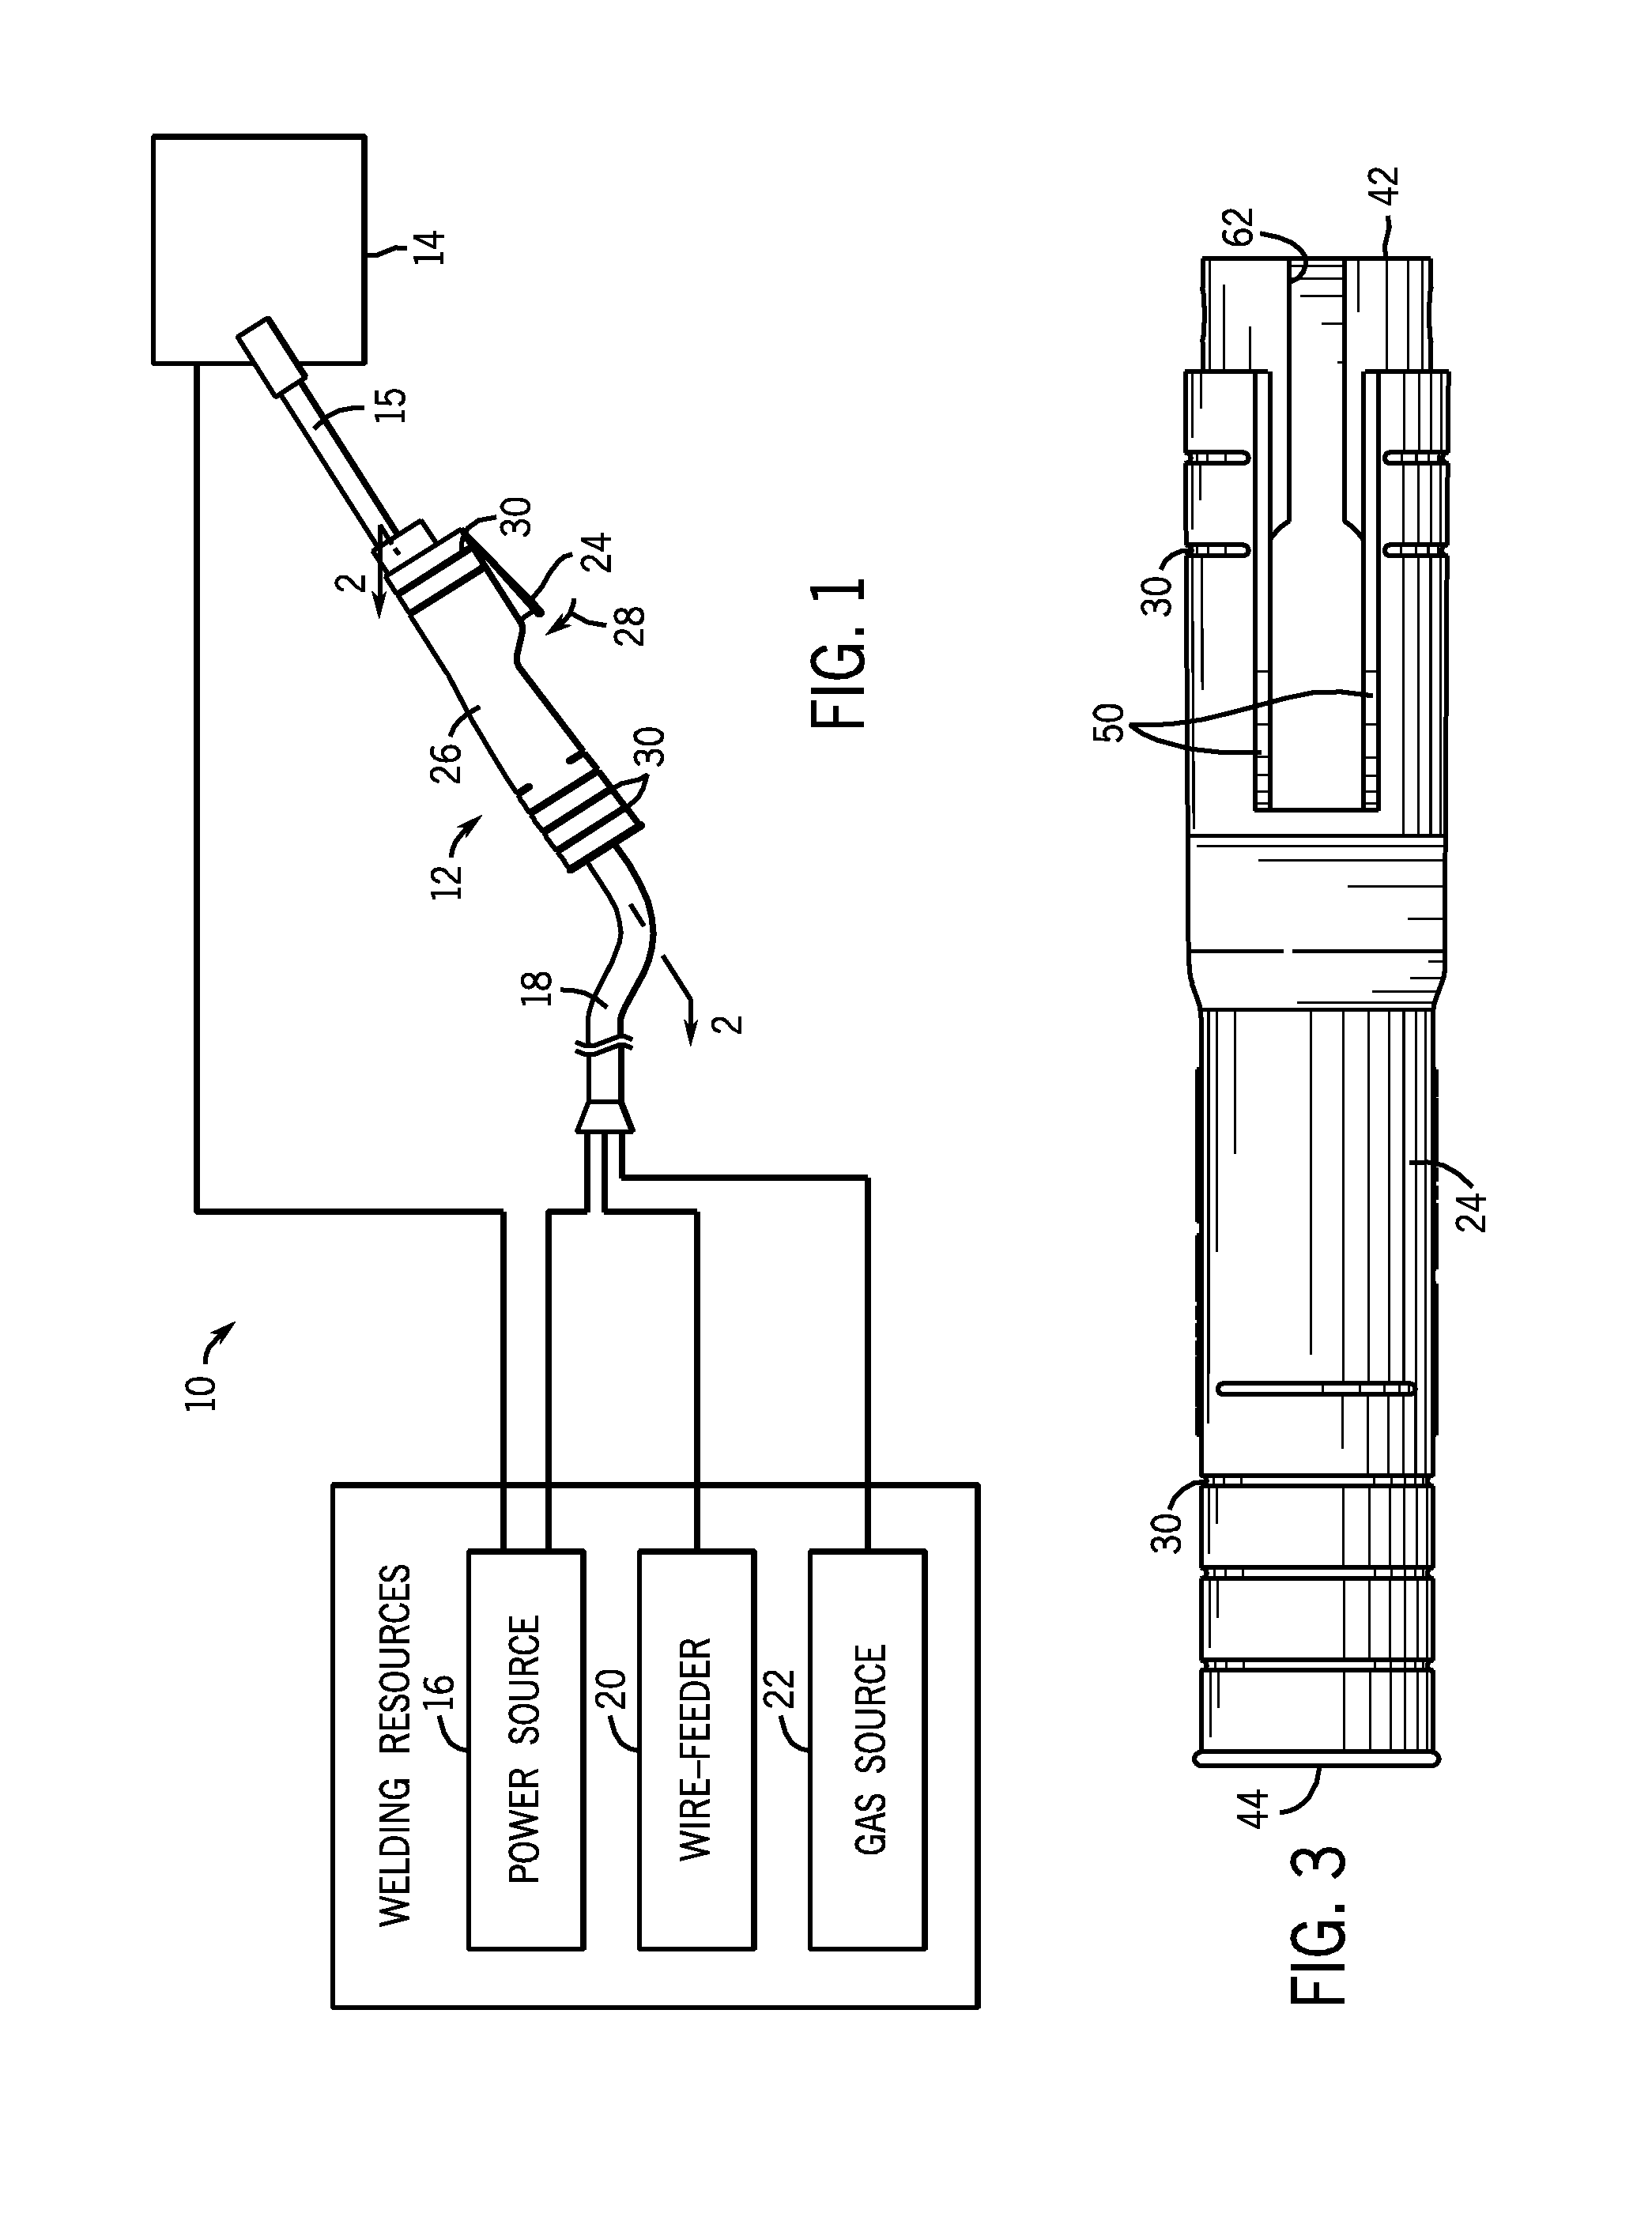 Welding torch handle utilizing slot for trigger attachment